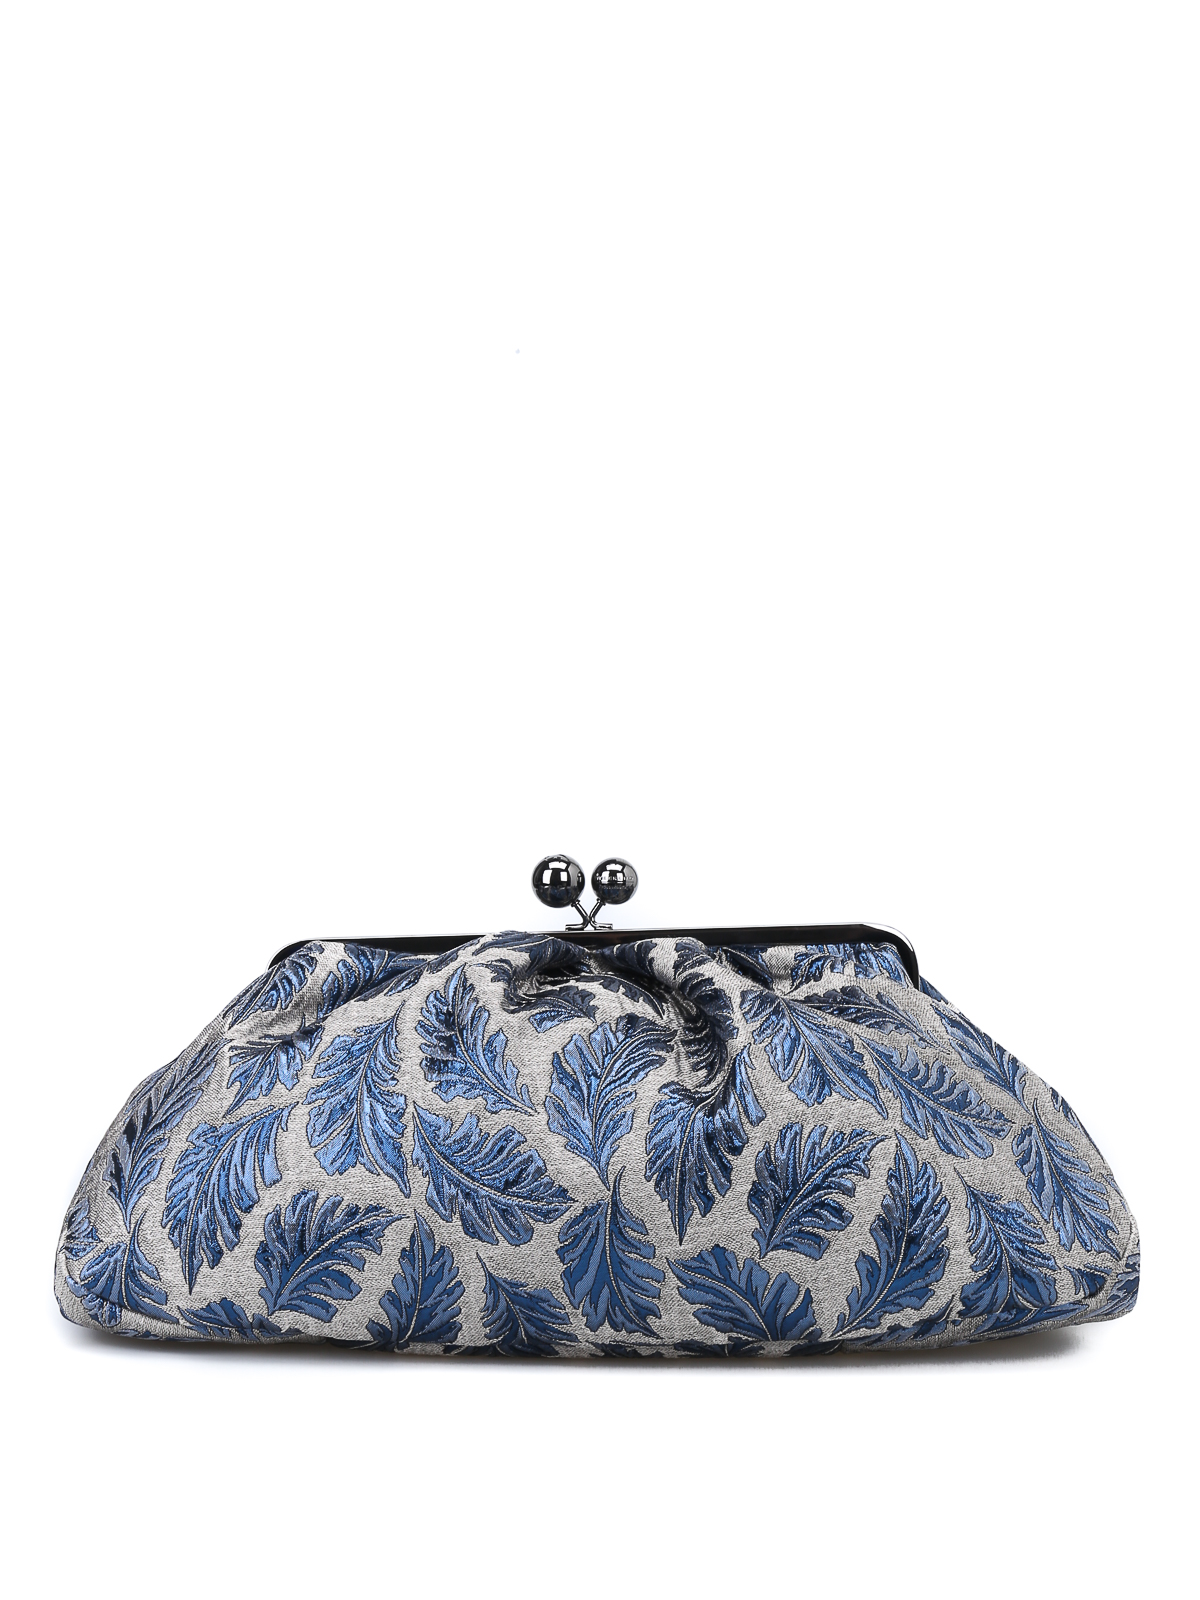 nicotine Witty lavender Clutches Max Mara - Blue and silver jacquard Pasticcino Maxi bag -  5516068206004